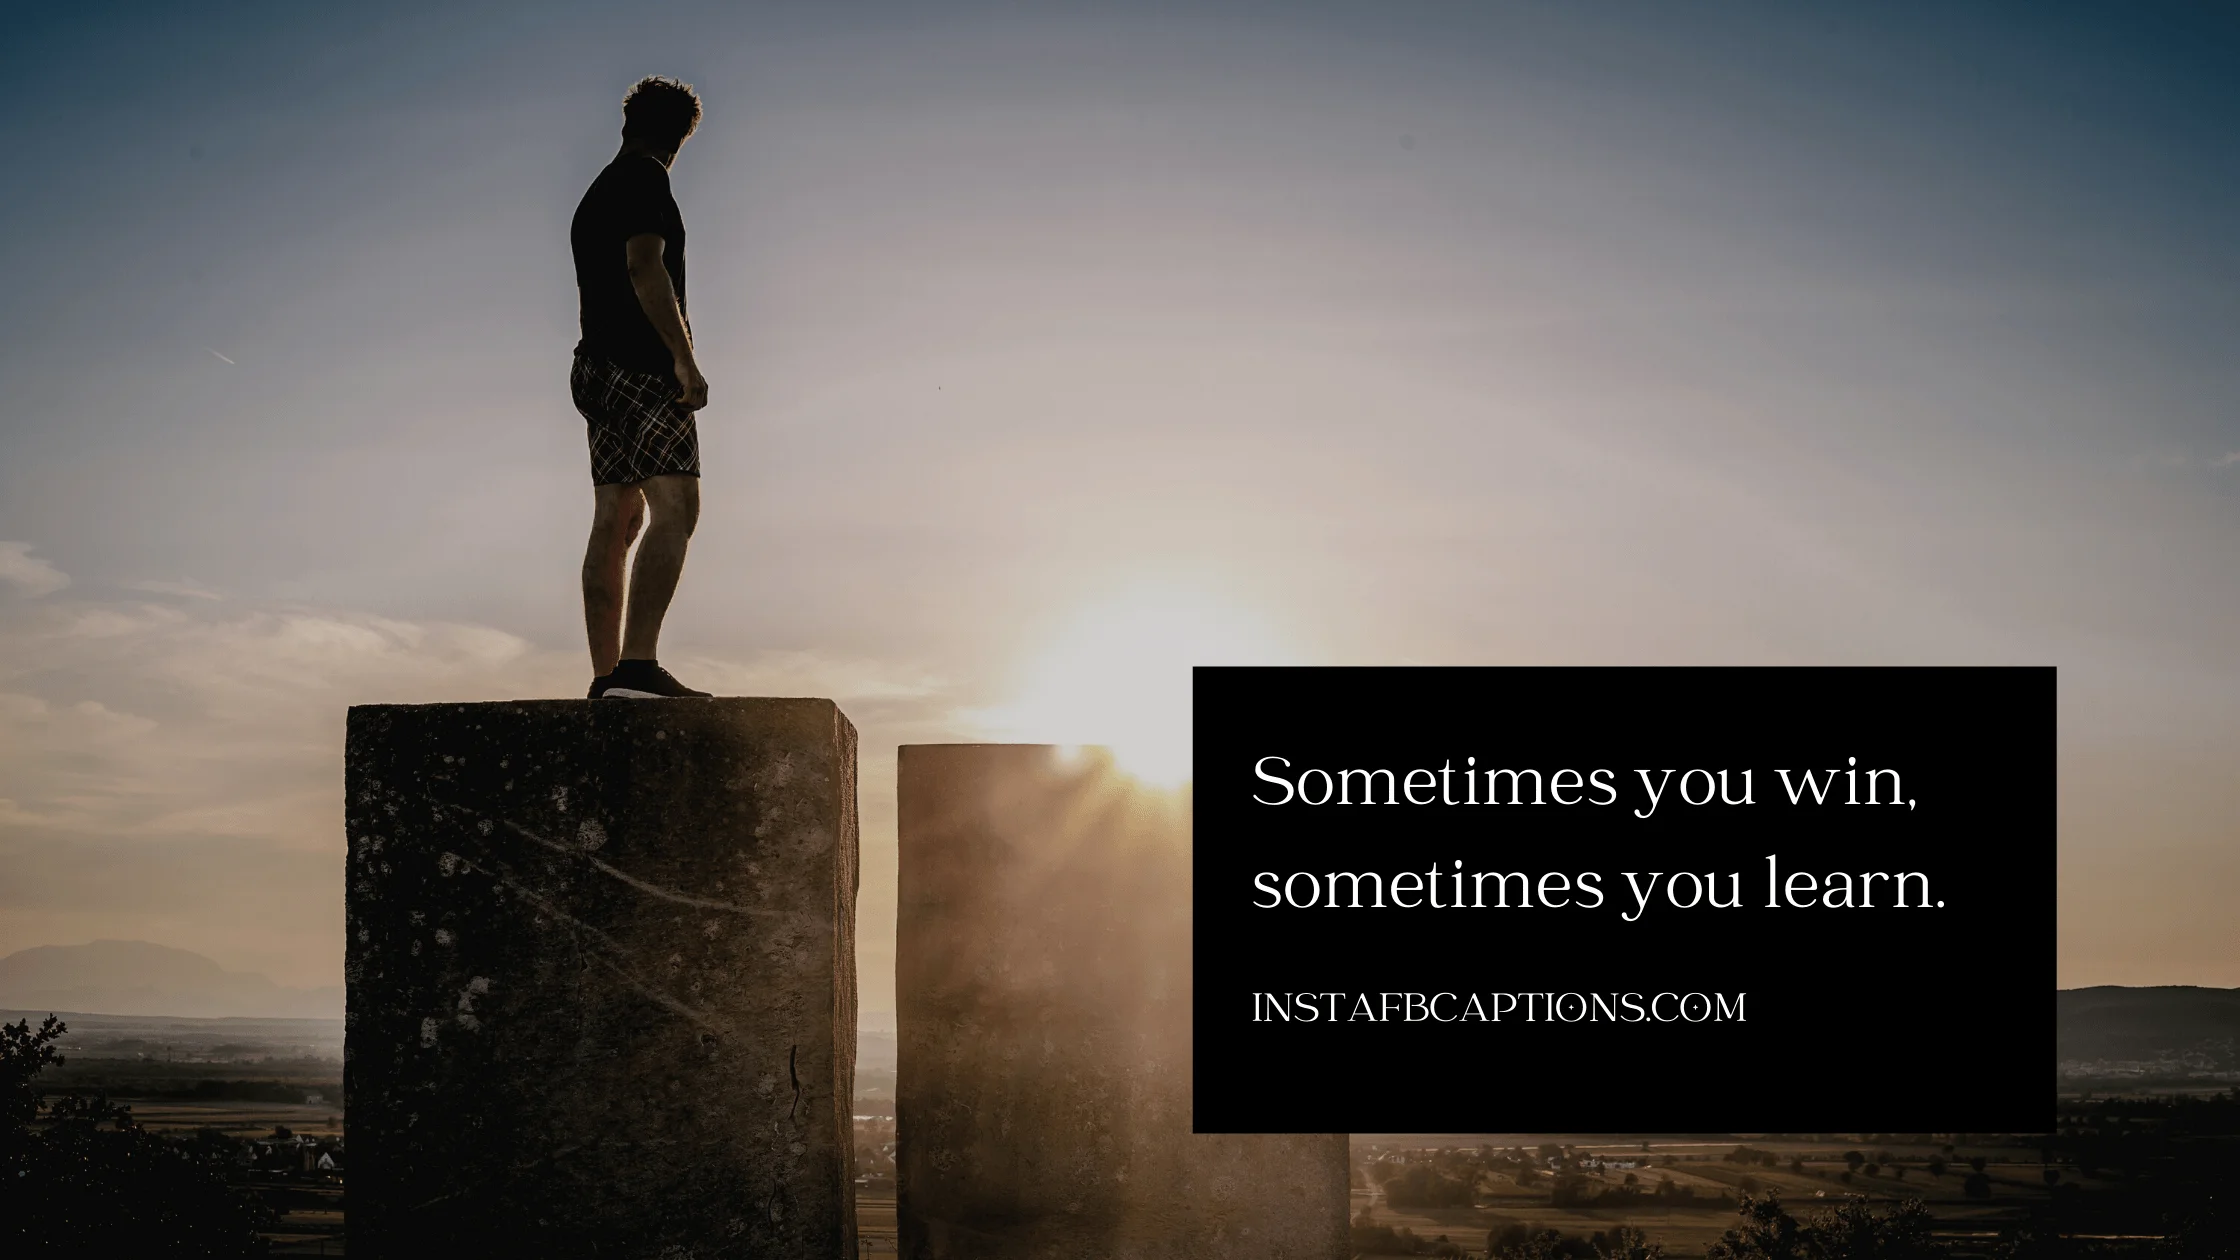 Sometimes you win, and sometimes you learn.  - Motivational Captions for Success - [Motivational] Captions For Positive Instagram Posts in 2023